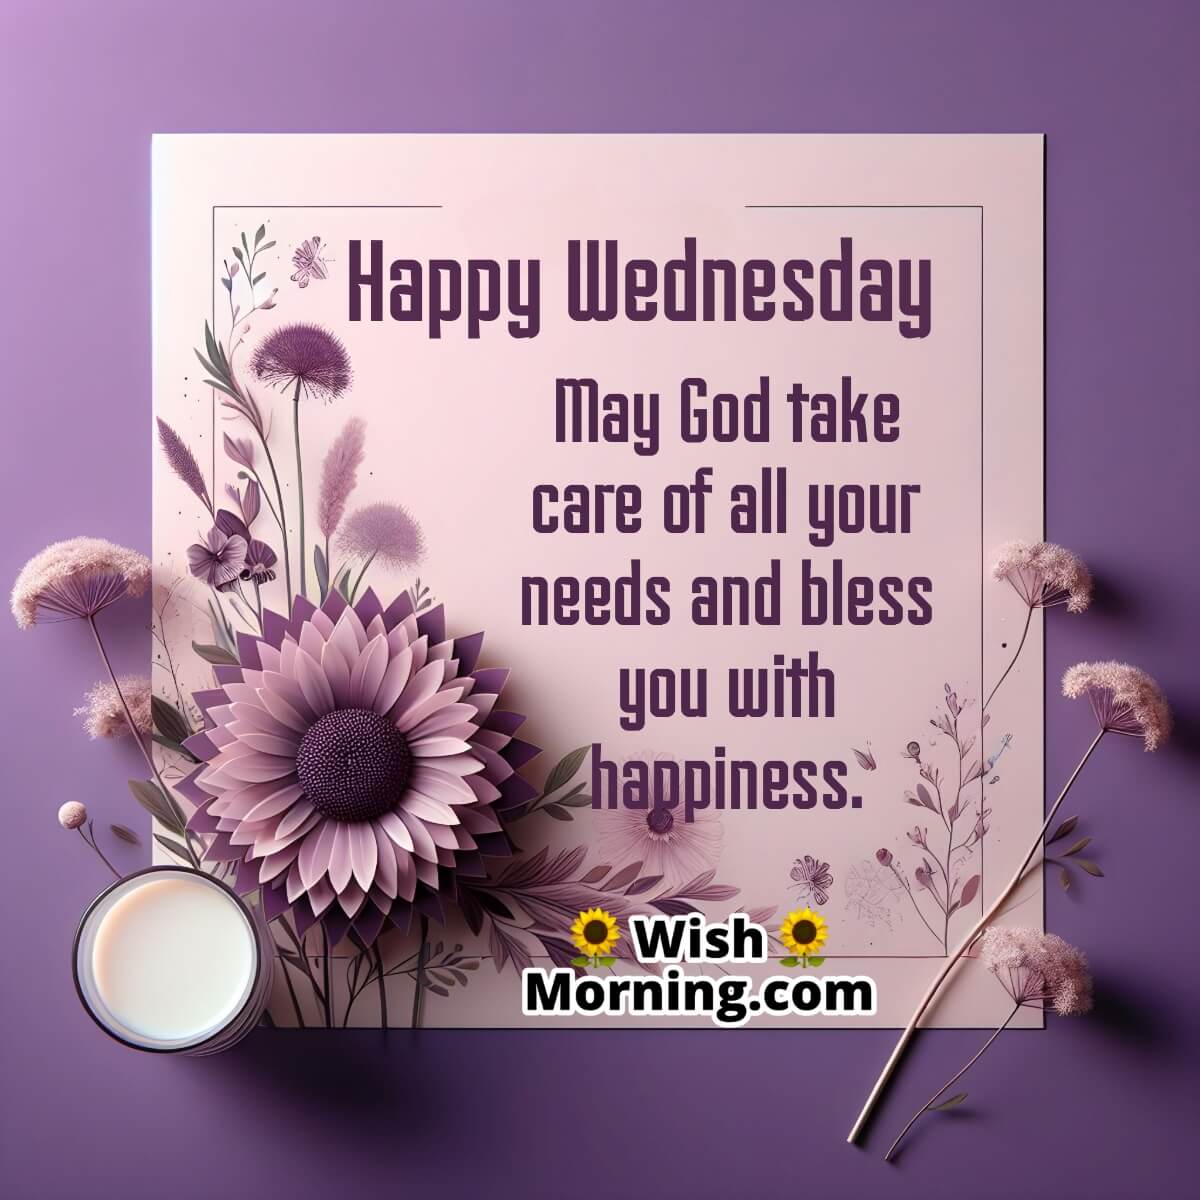 Happy Wednesday May God Bless You